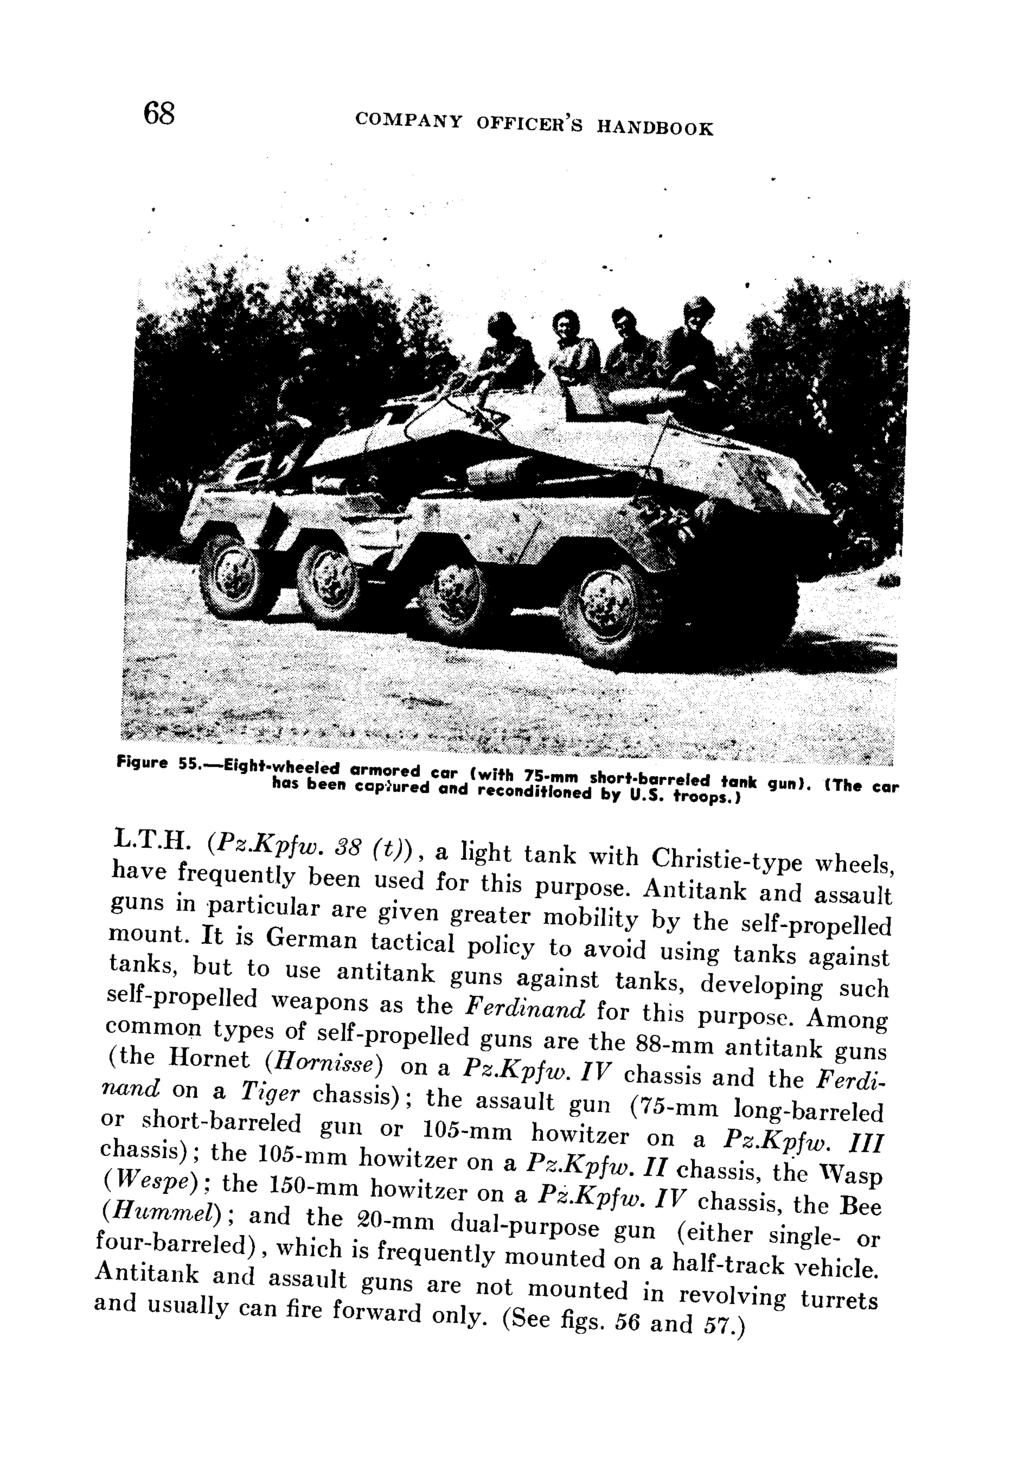 68 COMPANY OFFICER'S HANDBOOK Figure 55.-Eight-wheeled armored car (with 75-mm short.barreled tank gun). (The car has been captured and reconditioned by U.S. troops.) L.T.H. (Pz.Kpfw.